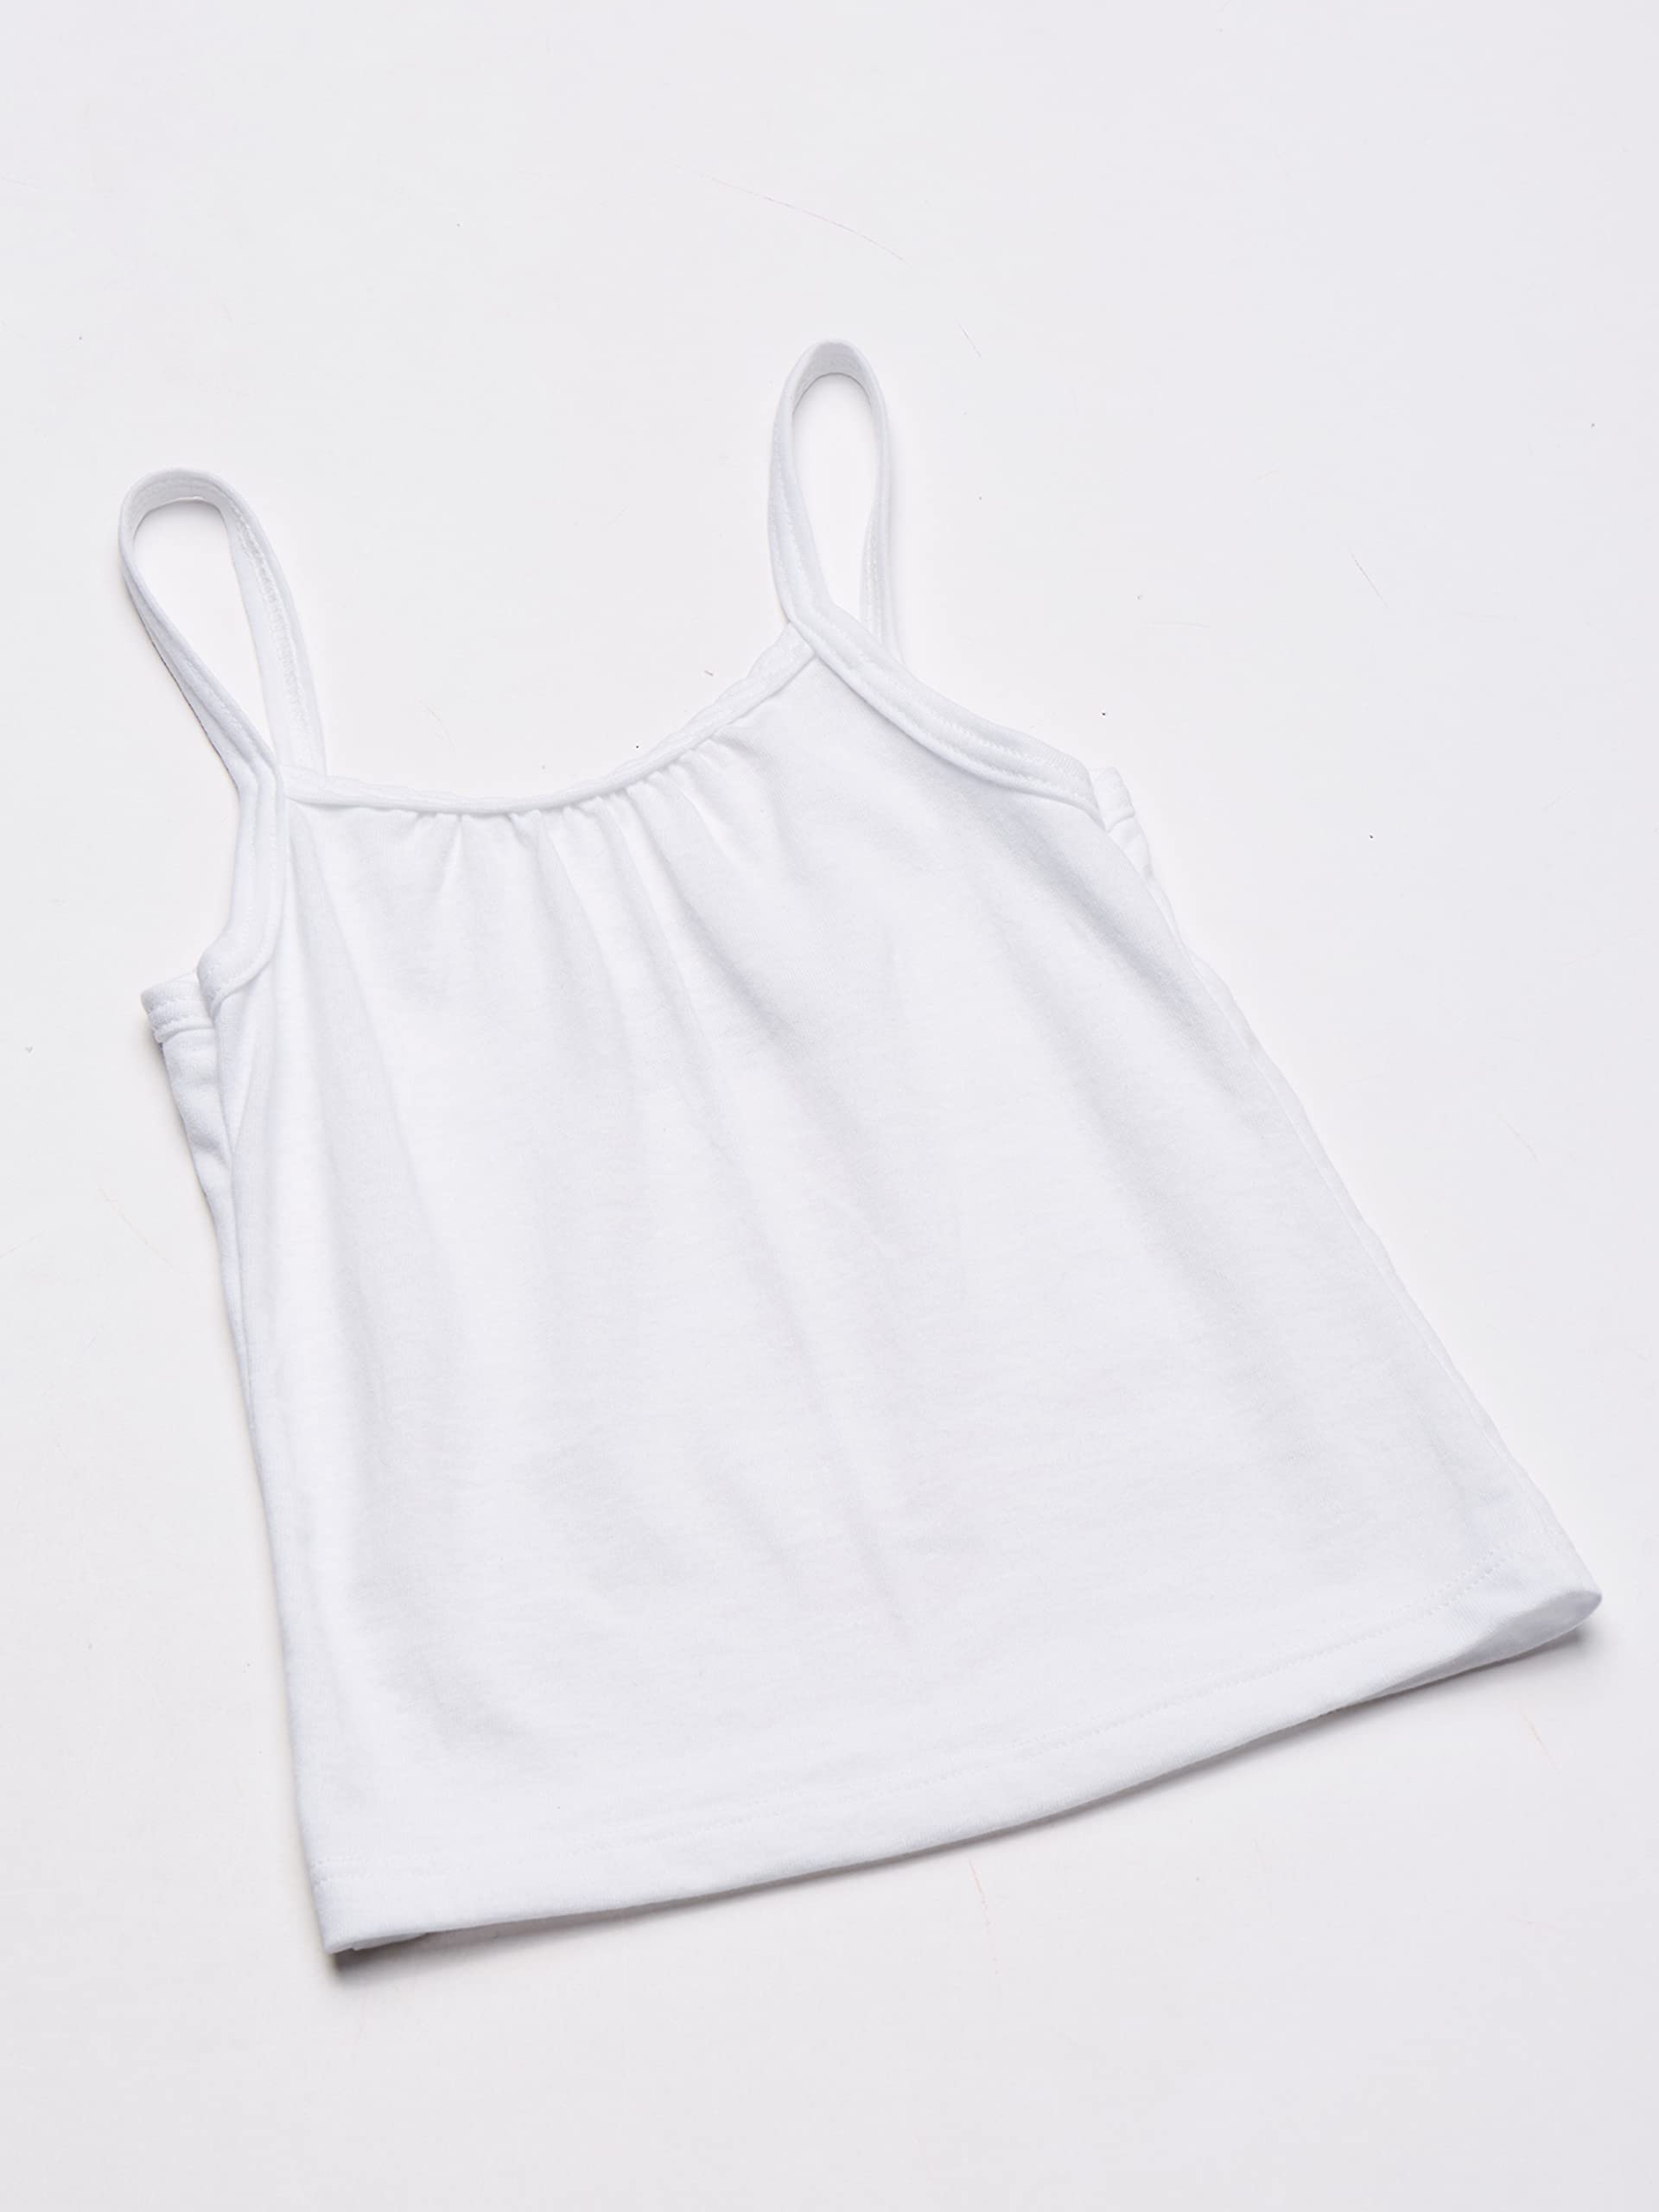 Hanes Girls' Camisole, 100% Cotton Tagless Cami, Toddler Sizing, Multiple Packs & Colors Available